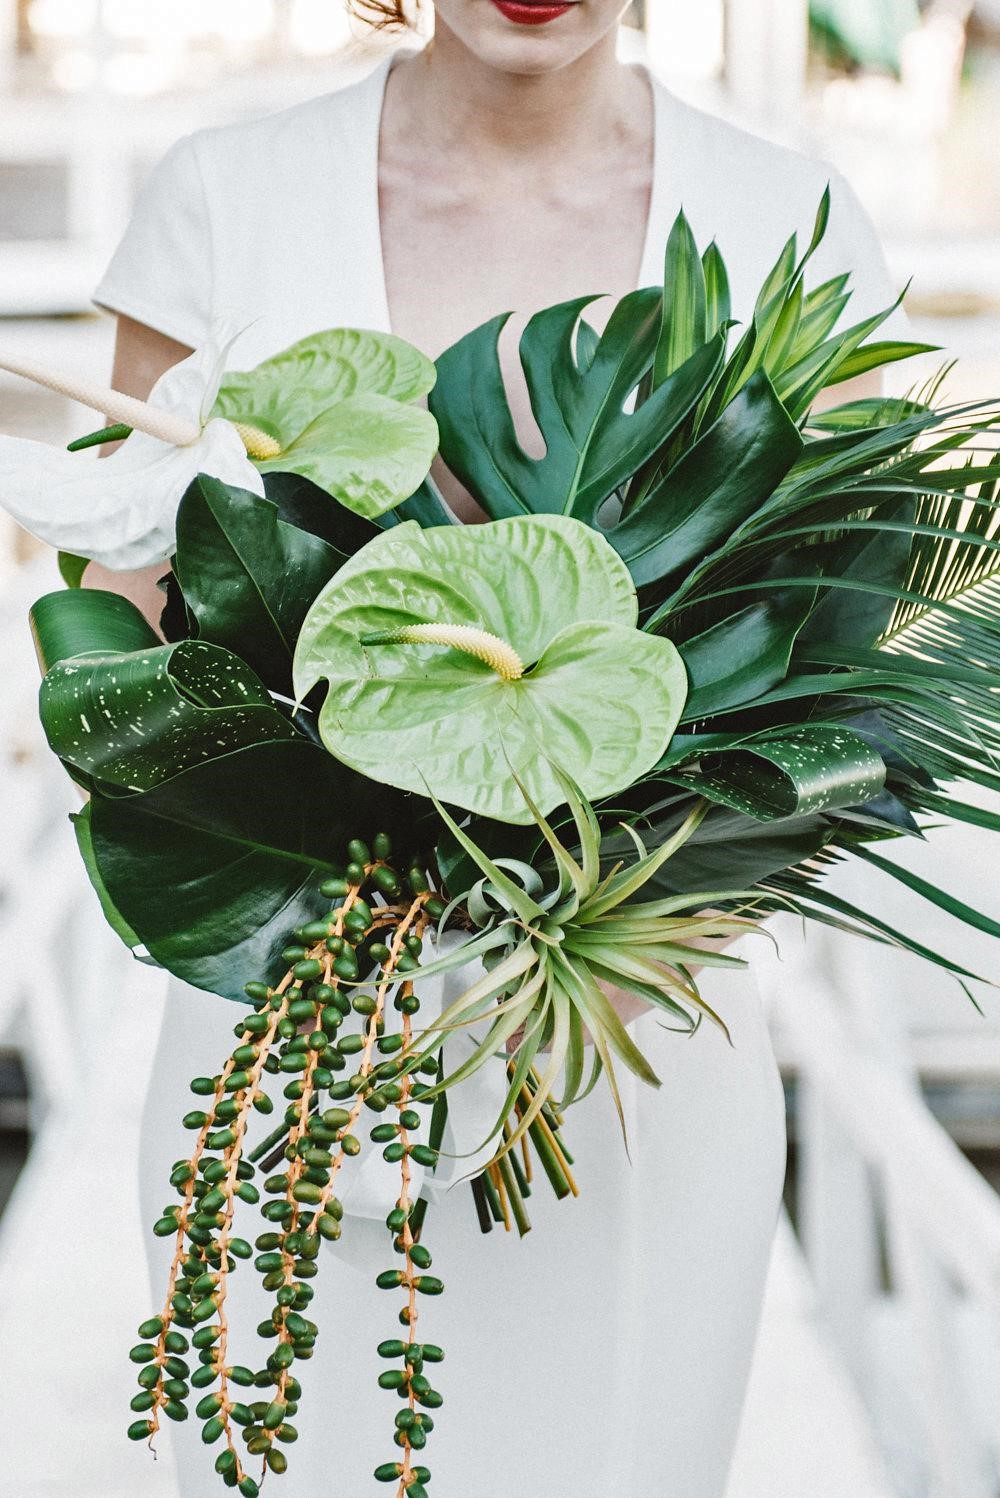 6 Interesting Greenery Ideas to Use Leaves for Your Wedding